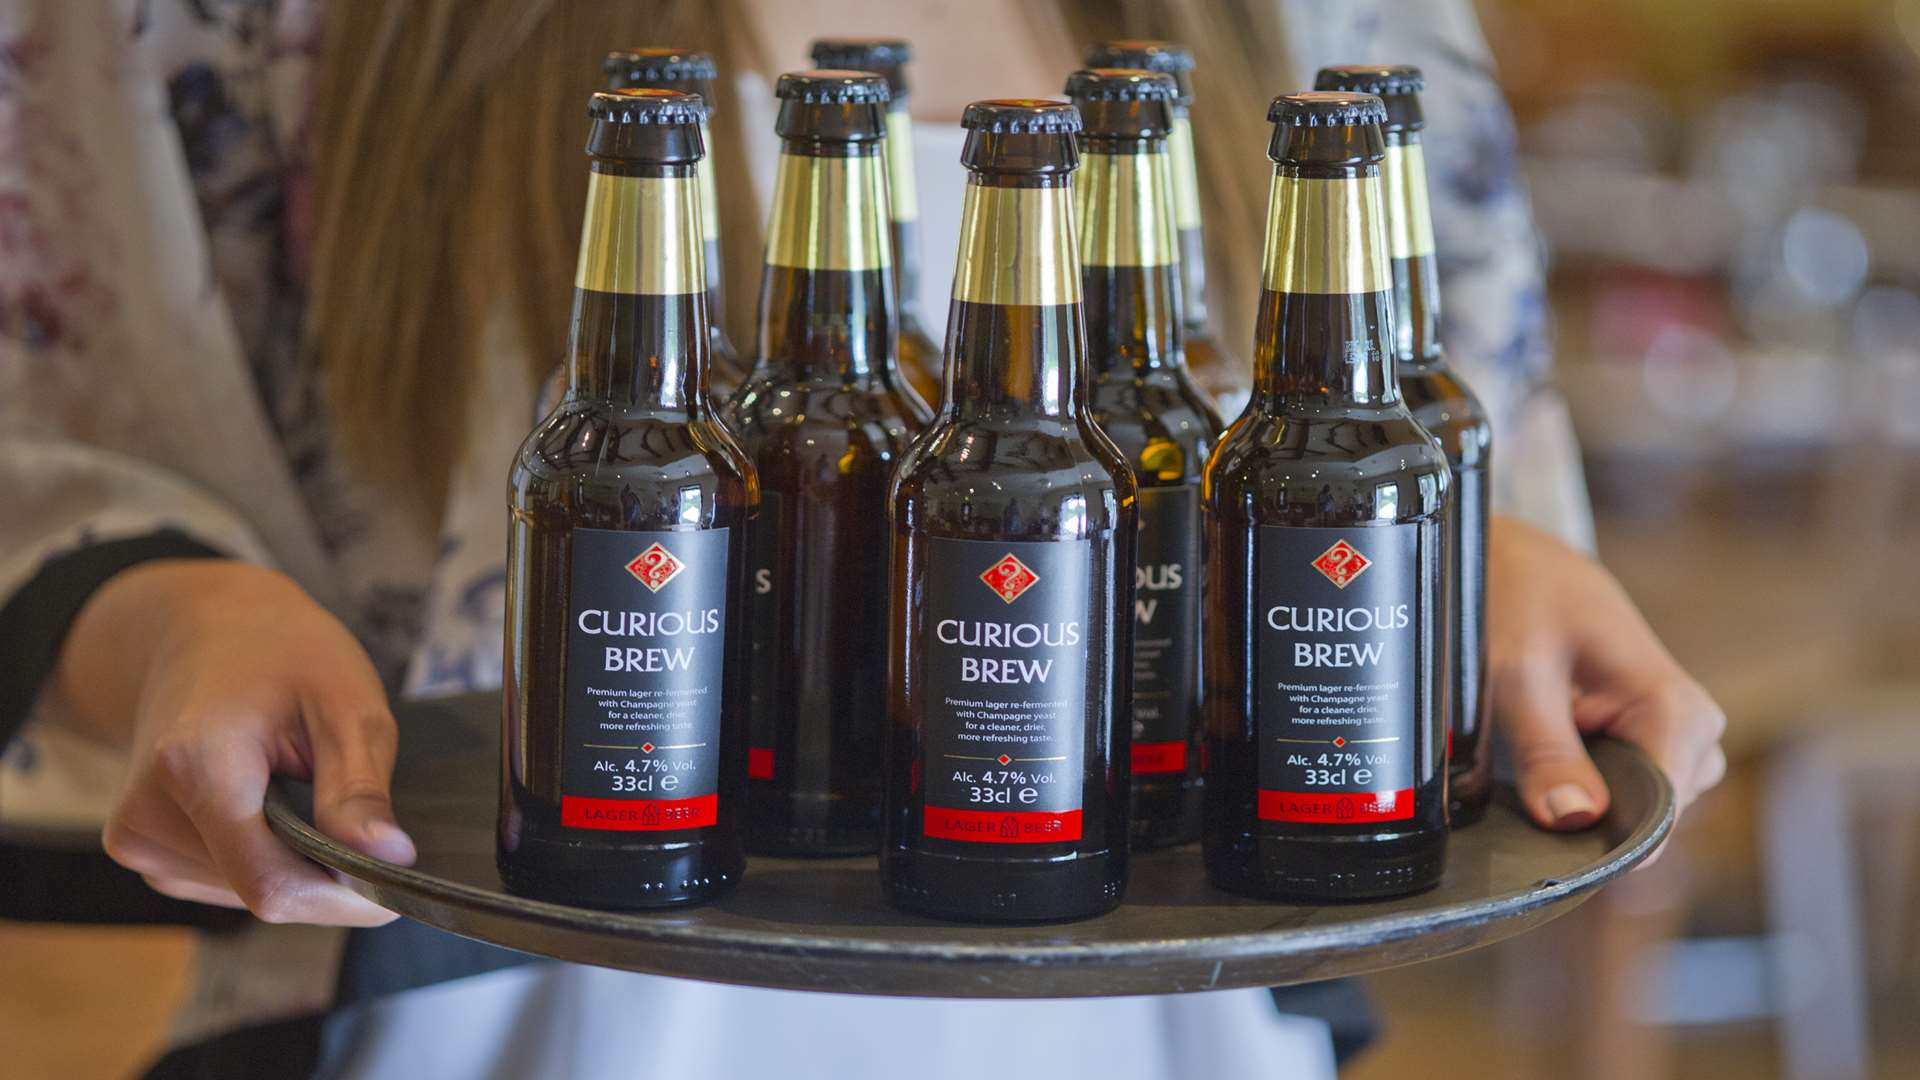 Chapel Down also makes beer under its Curious Drinks brand